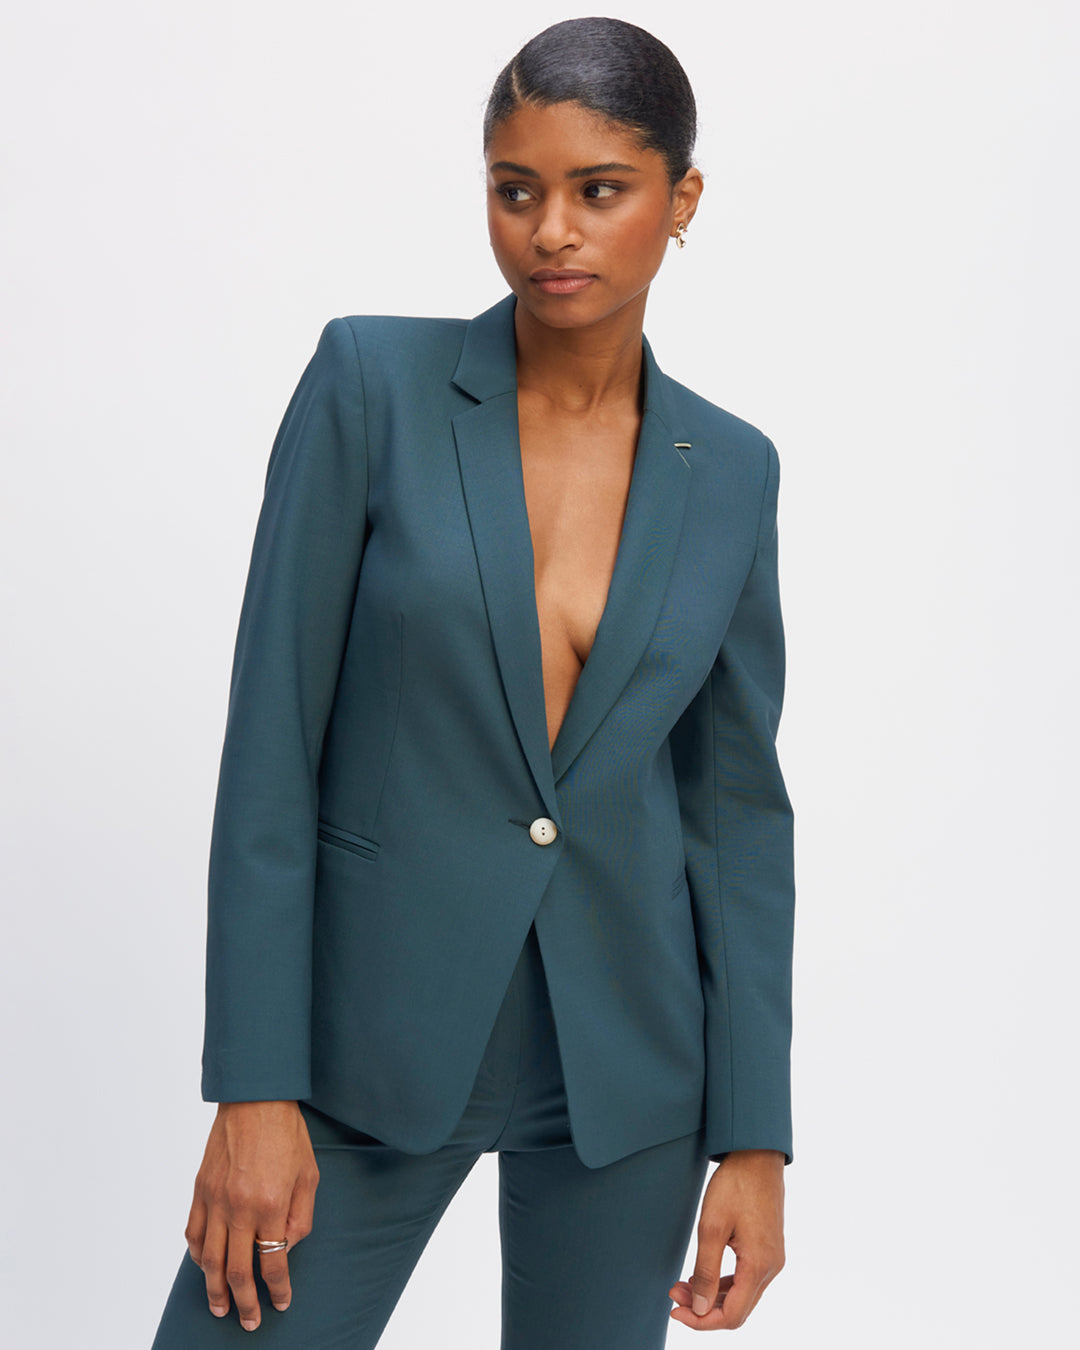 Jacket-knit-blazer-green-cut-curve-knit-collar-length-below-bottom-two-pockets-under-breasted-two-pockets-inside-fully-lined-17H10-knit-jacket-for-women-paris-